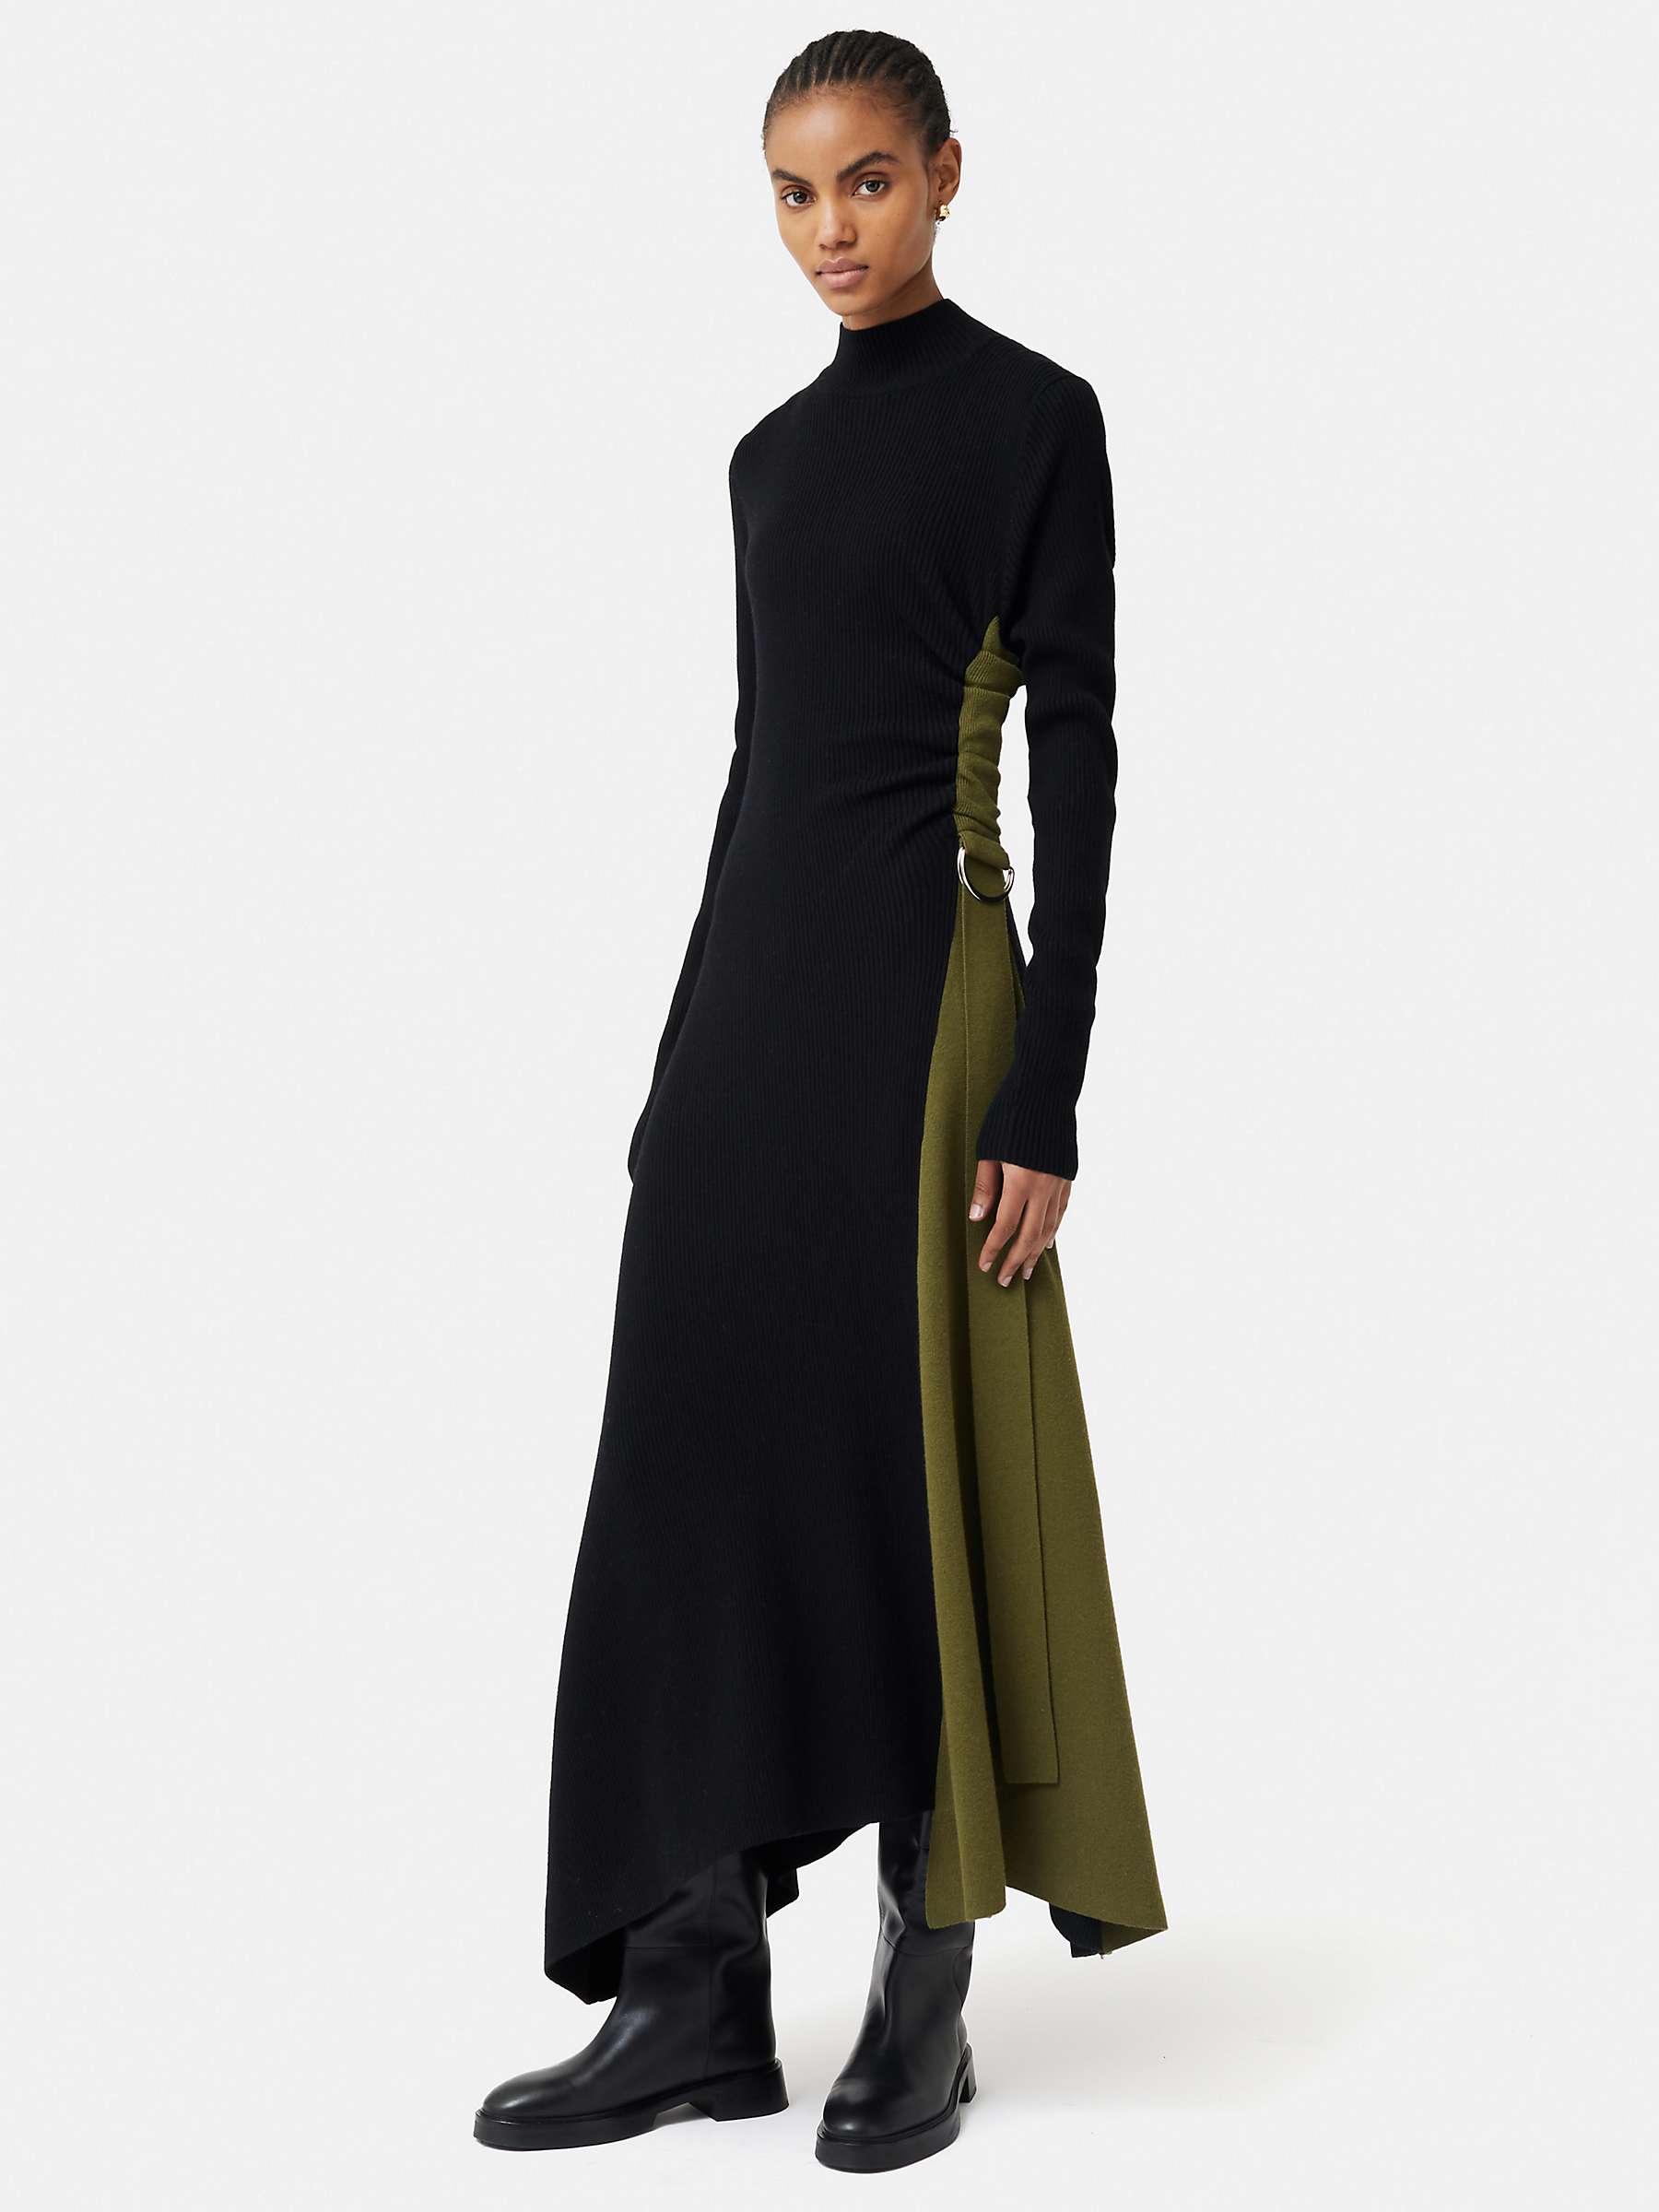 Buy Jigsaw D-Ring Knitted Wool Blend Maxi Dress, Black/Olive Online at johnlewis.com